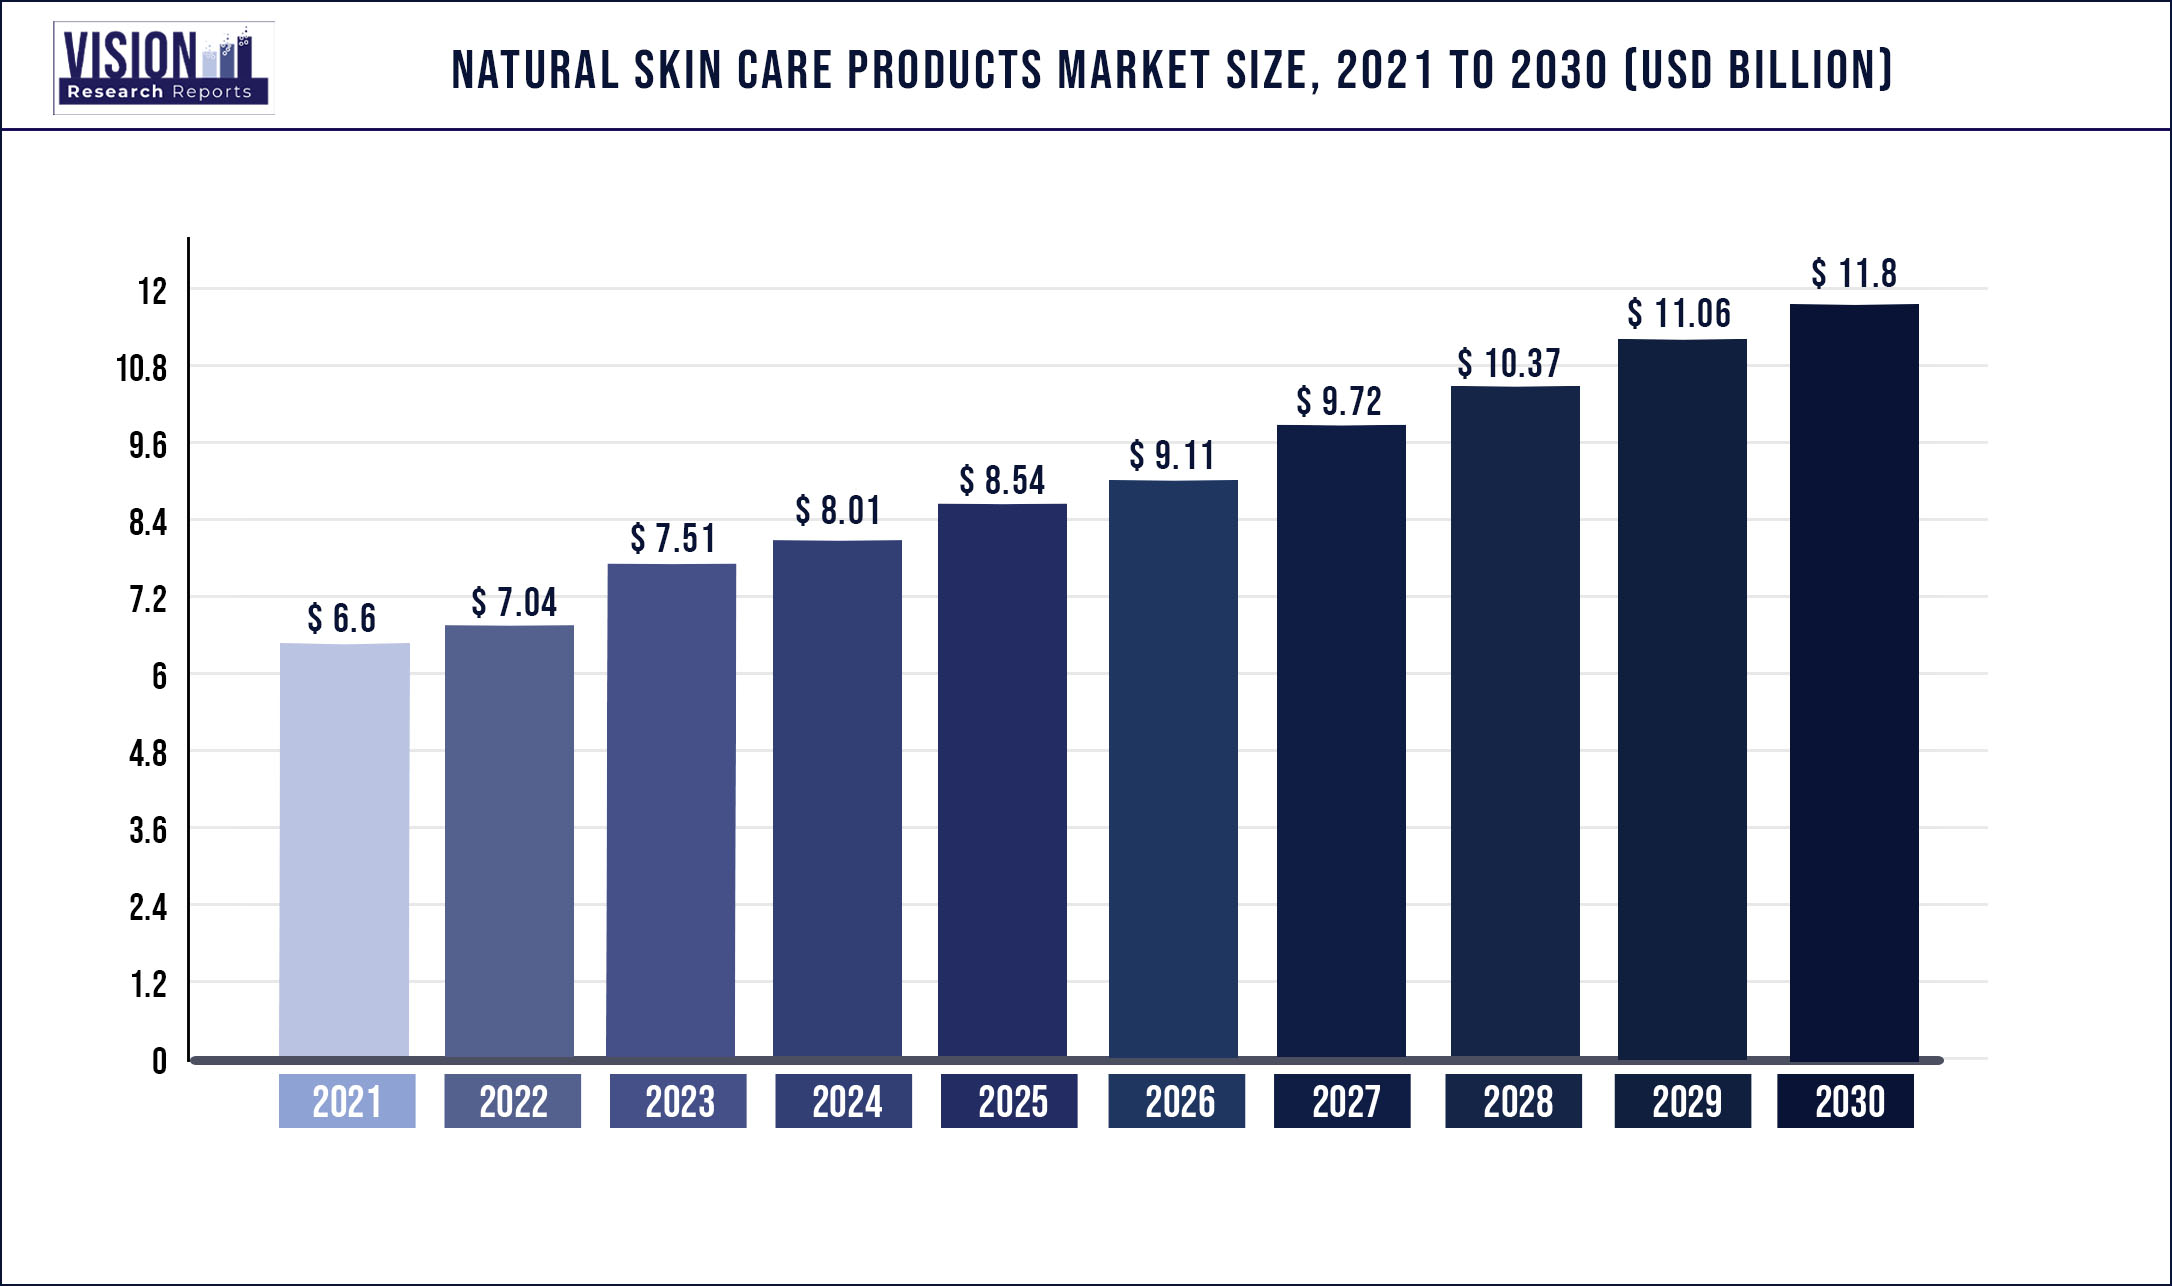 Natural Skin Care Products Market Size 2021 to 2030